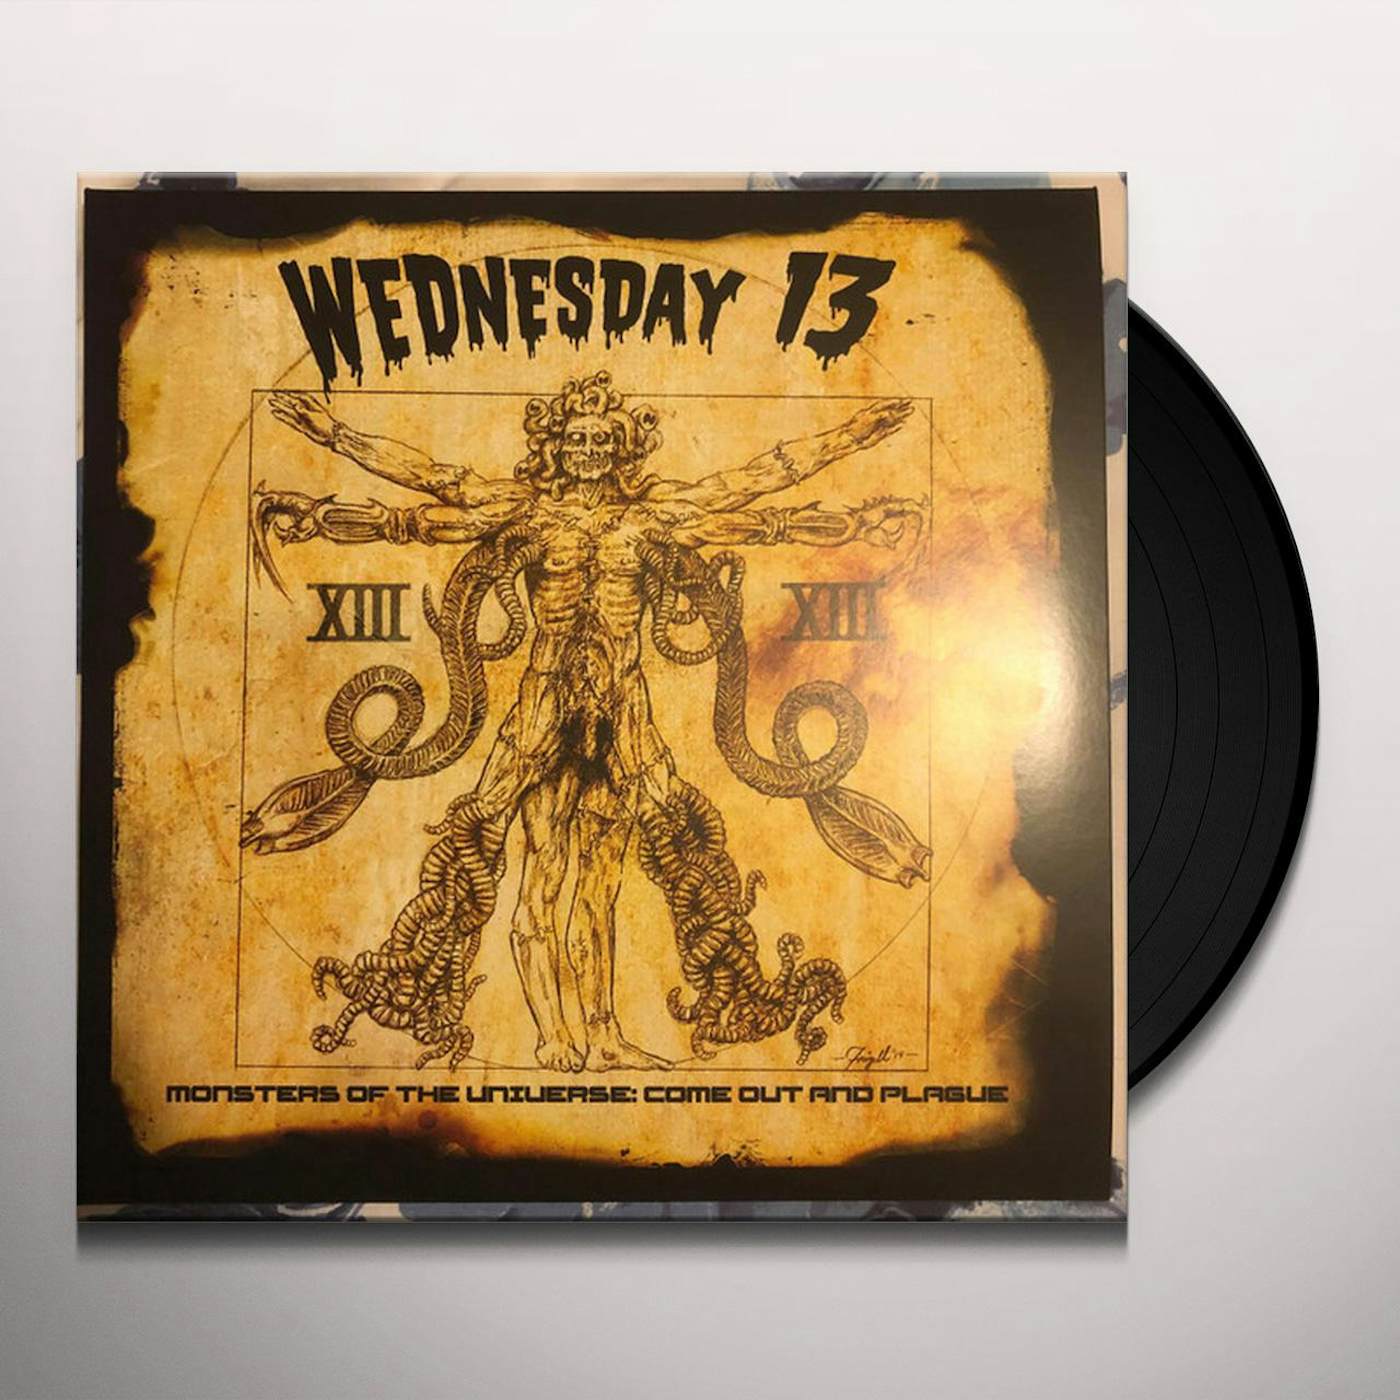 Wednesday 13 MONSTERS OF THE UNIVERSE: COME OUT & PLAGUE (X) (GOLD VINYL) Vinyl Record